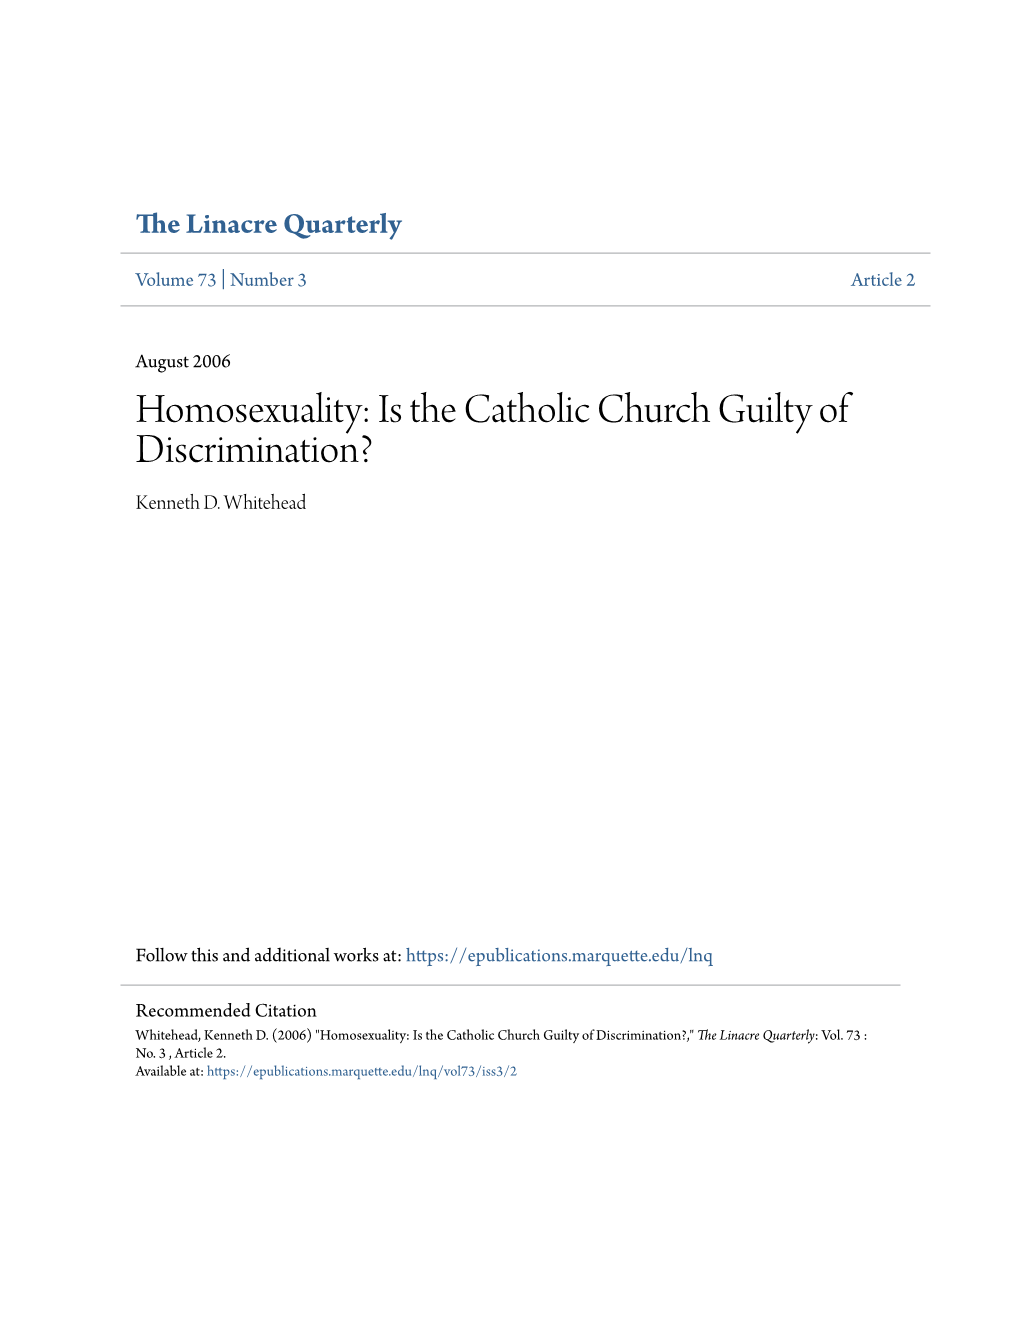 Homosexuality: Is the Catholic Church Guilty of Discrimination? Kenneth D